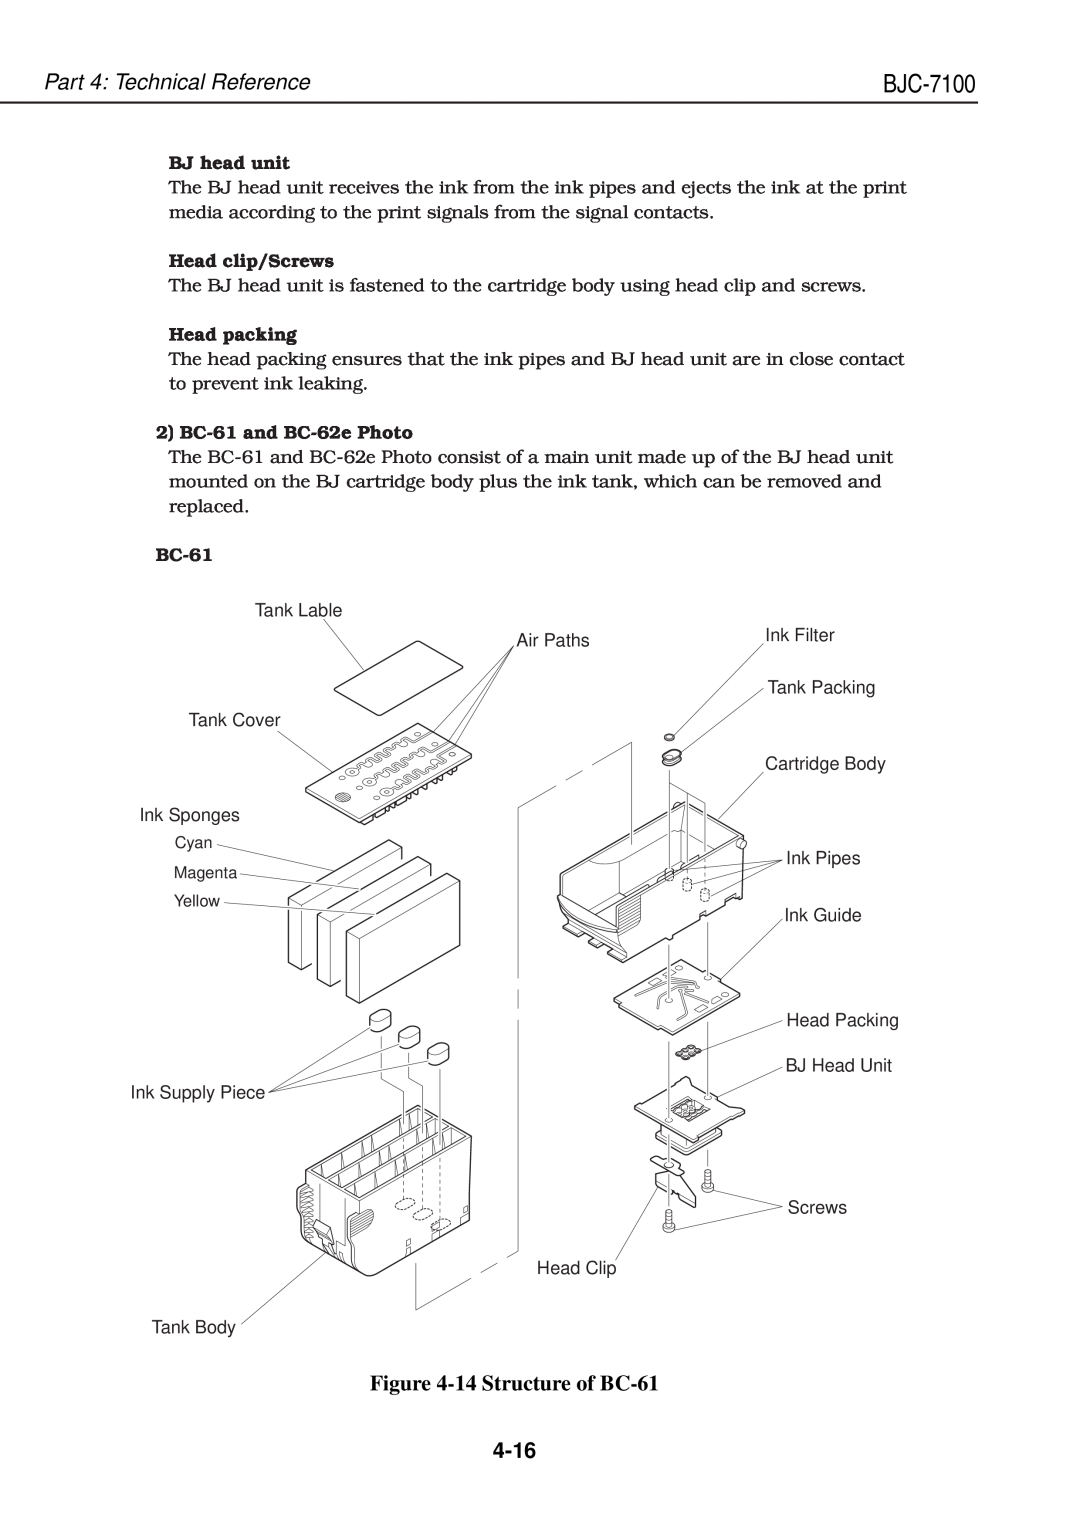 Canon QY8-1360-000 manual 14 Structure of BC-61, 4-16, Part 4 Technical Reference, BJC-7100, BJ head unit, Head clip/Screws 